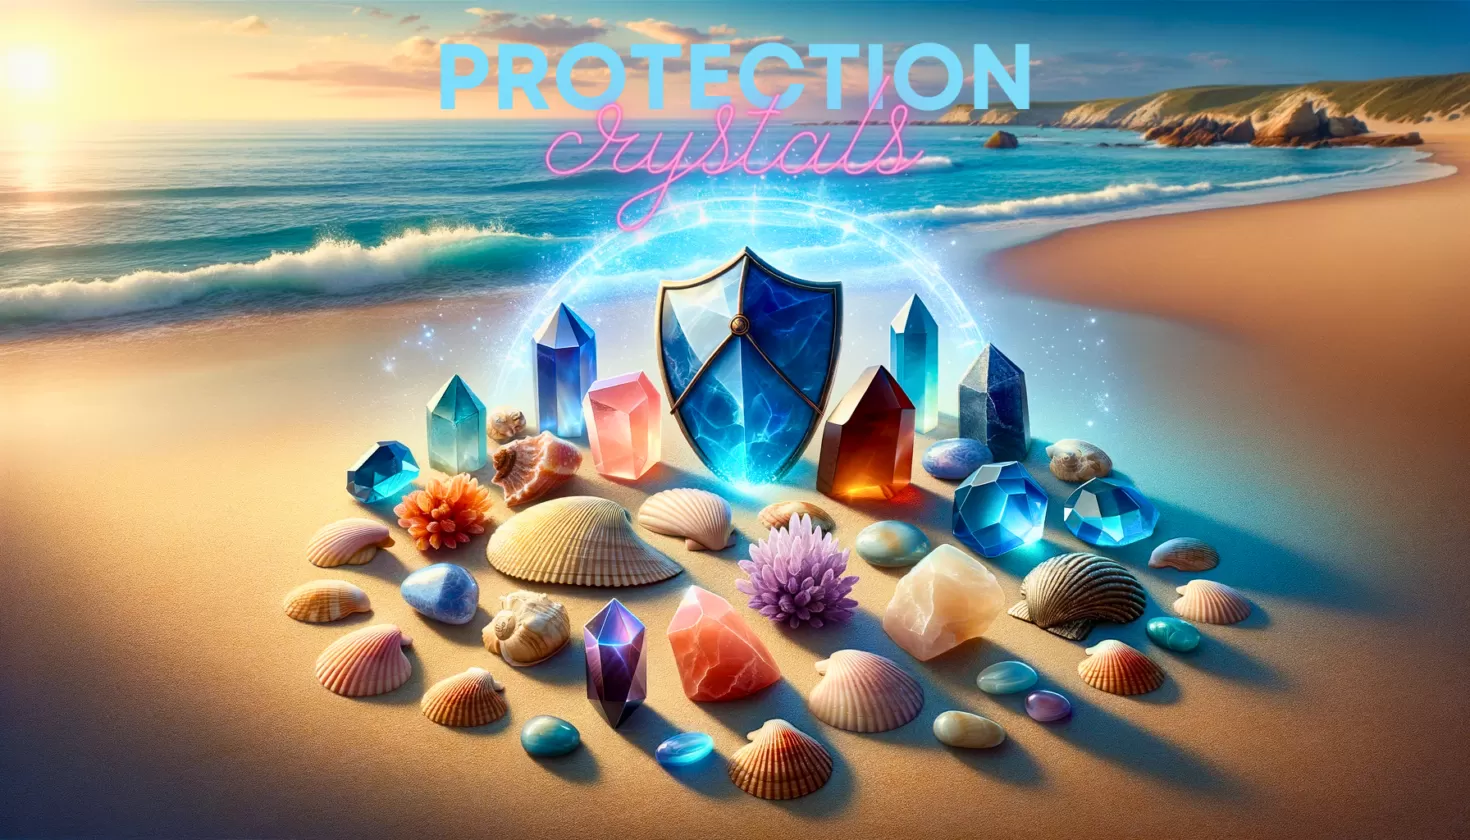 Healing crystals for protection, including sapphire and garnet, on a beach symbolizing safety and defense